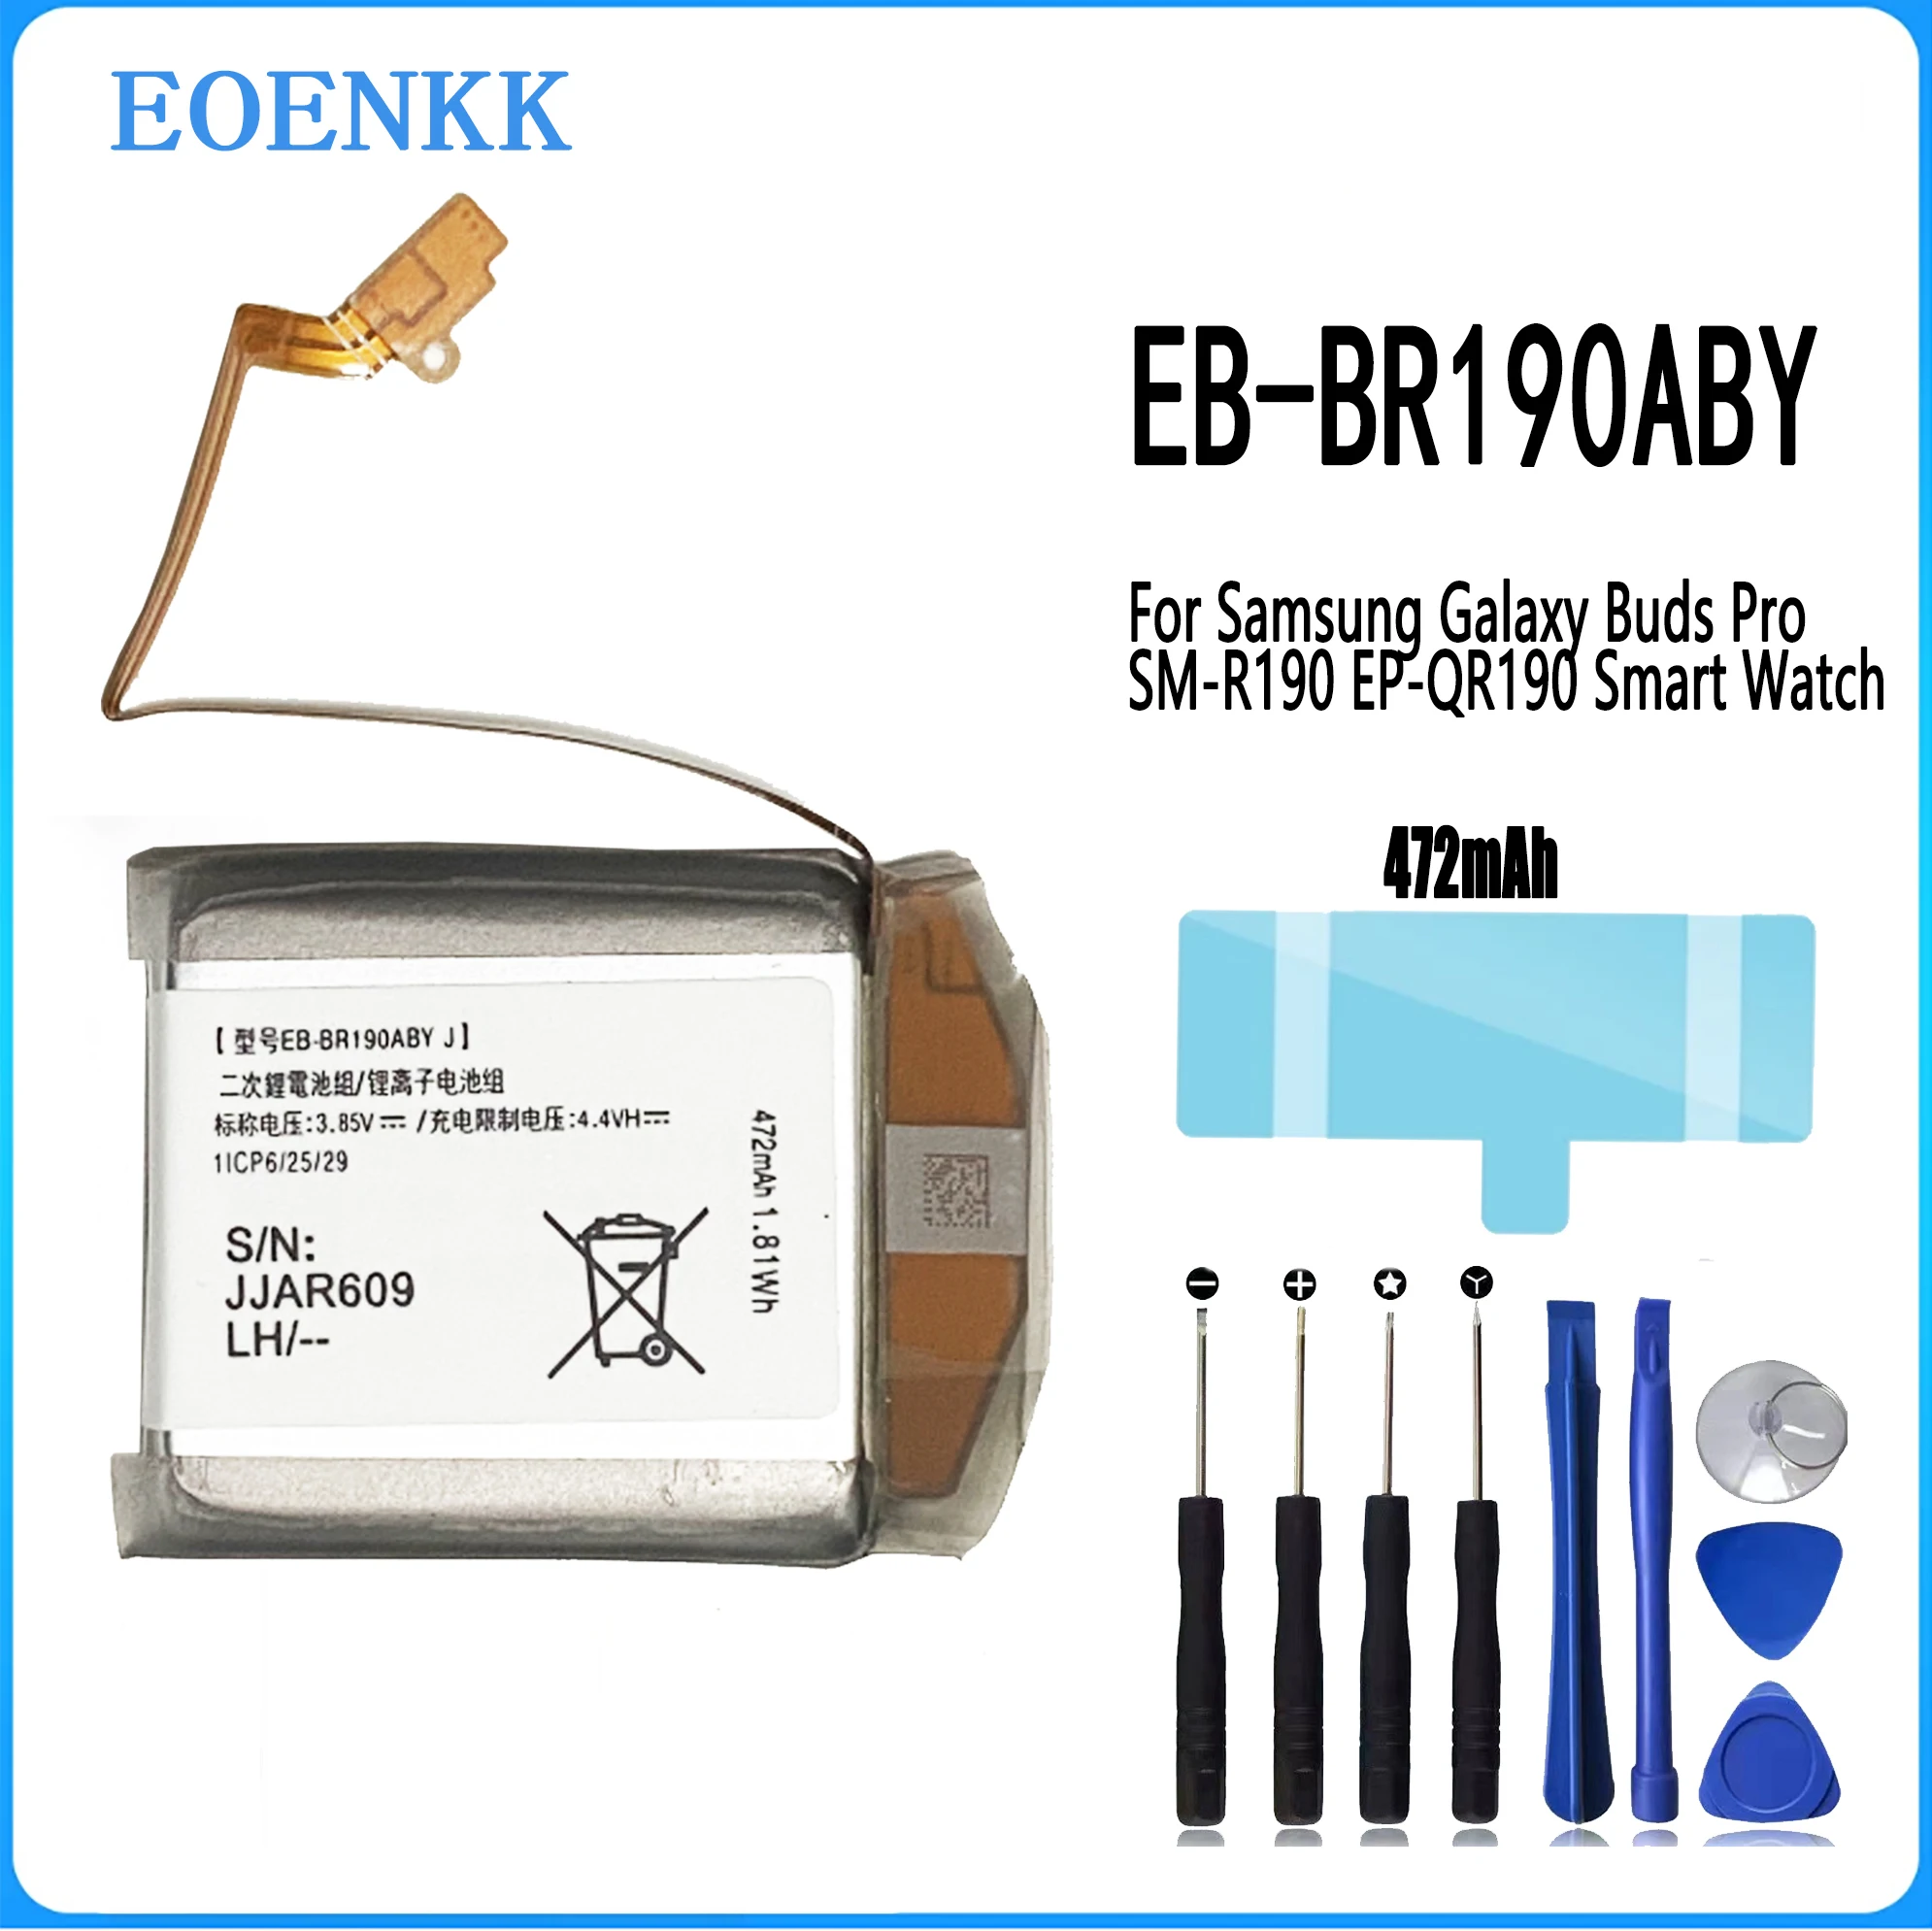 EB-BR190ABY EB-BR190ABU Battery For Samsung Galaxy Buds Pro SM-R190 EP-QR190 Earphone Smart Watch Original Capacity Batteries enlarge